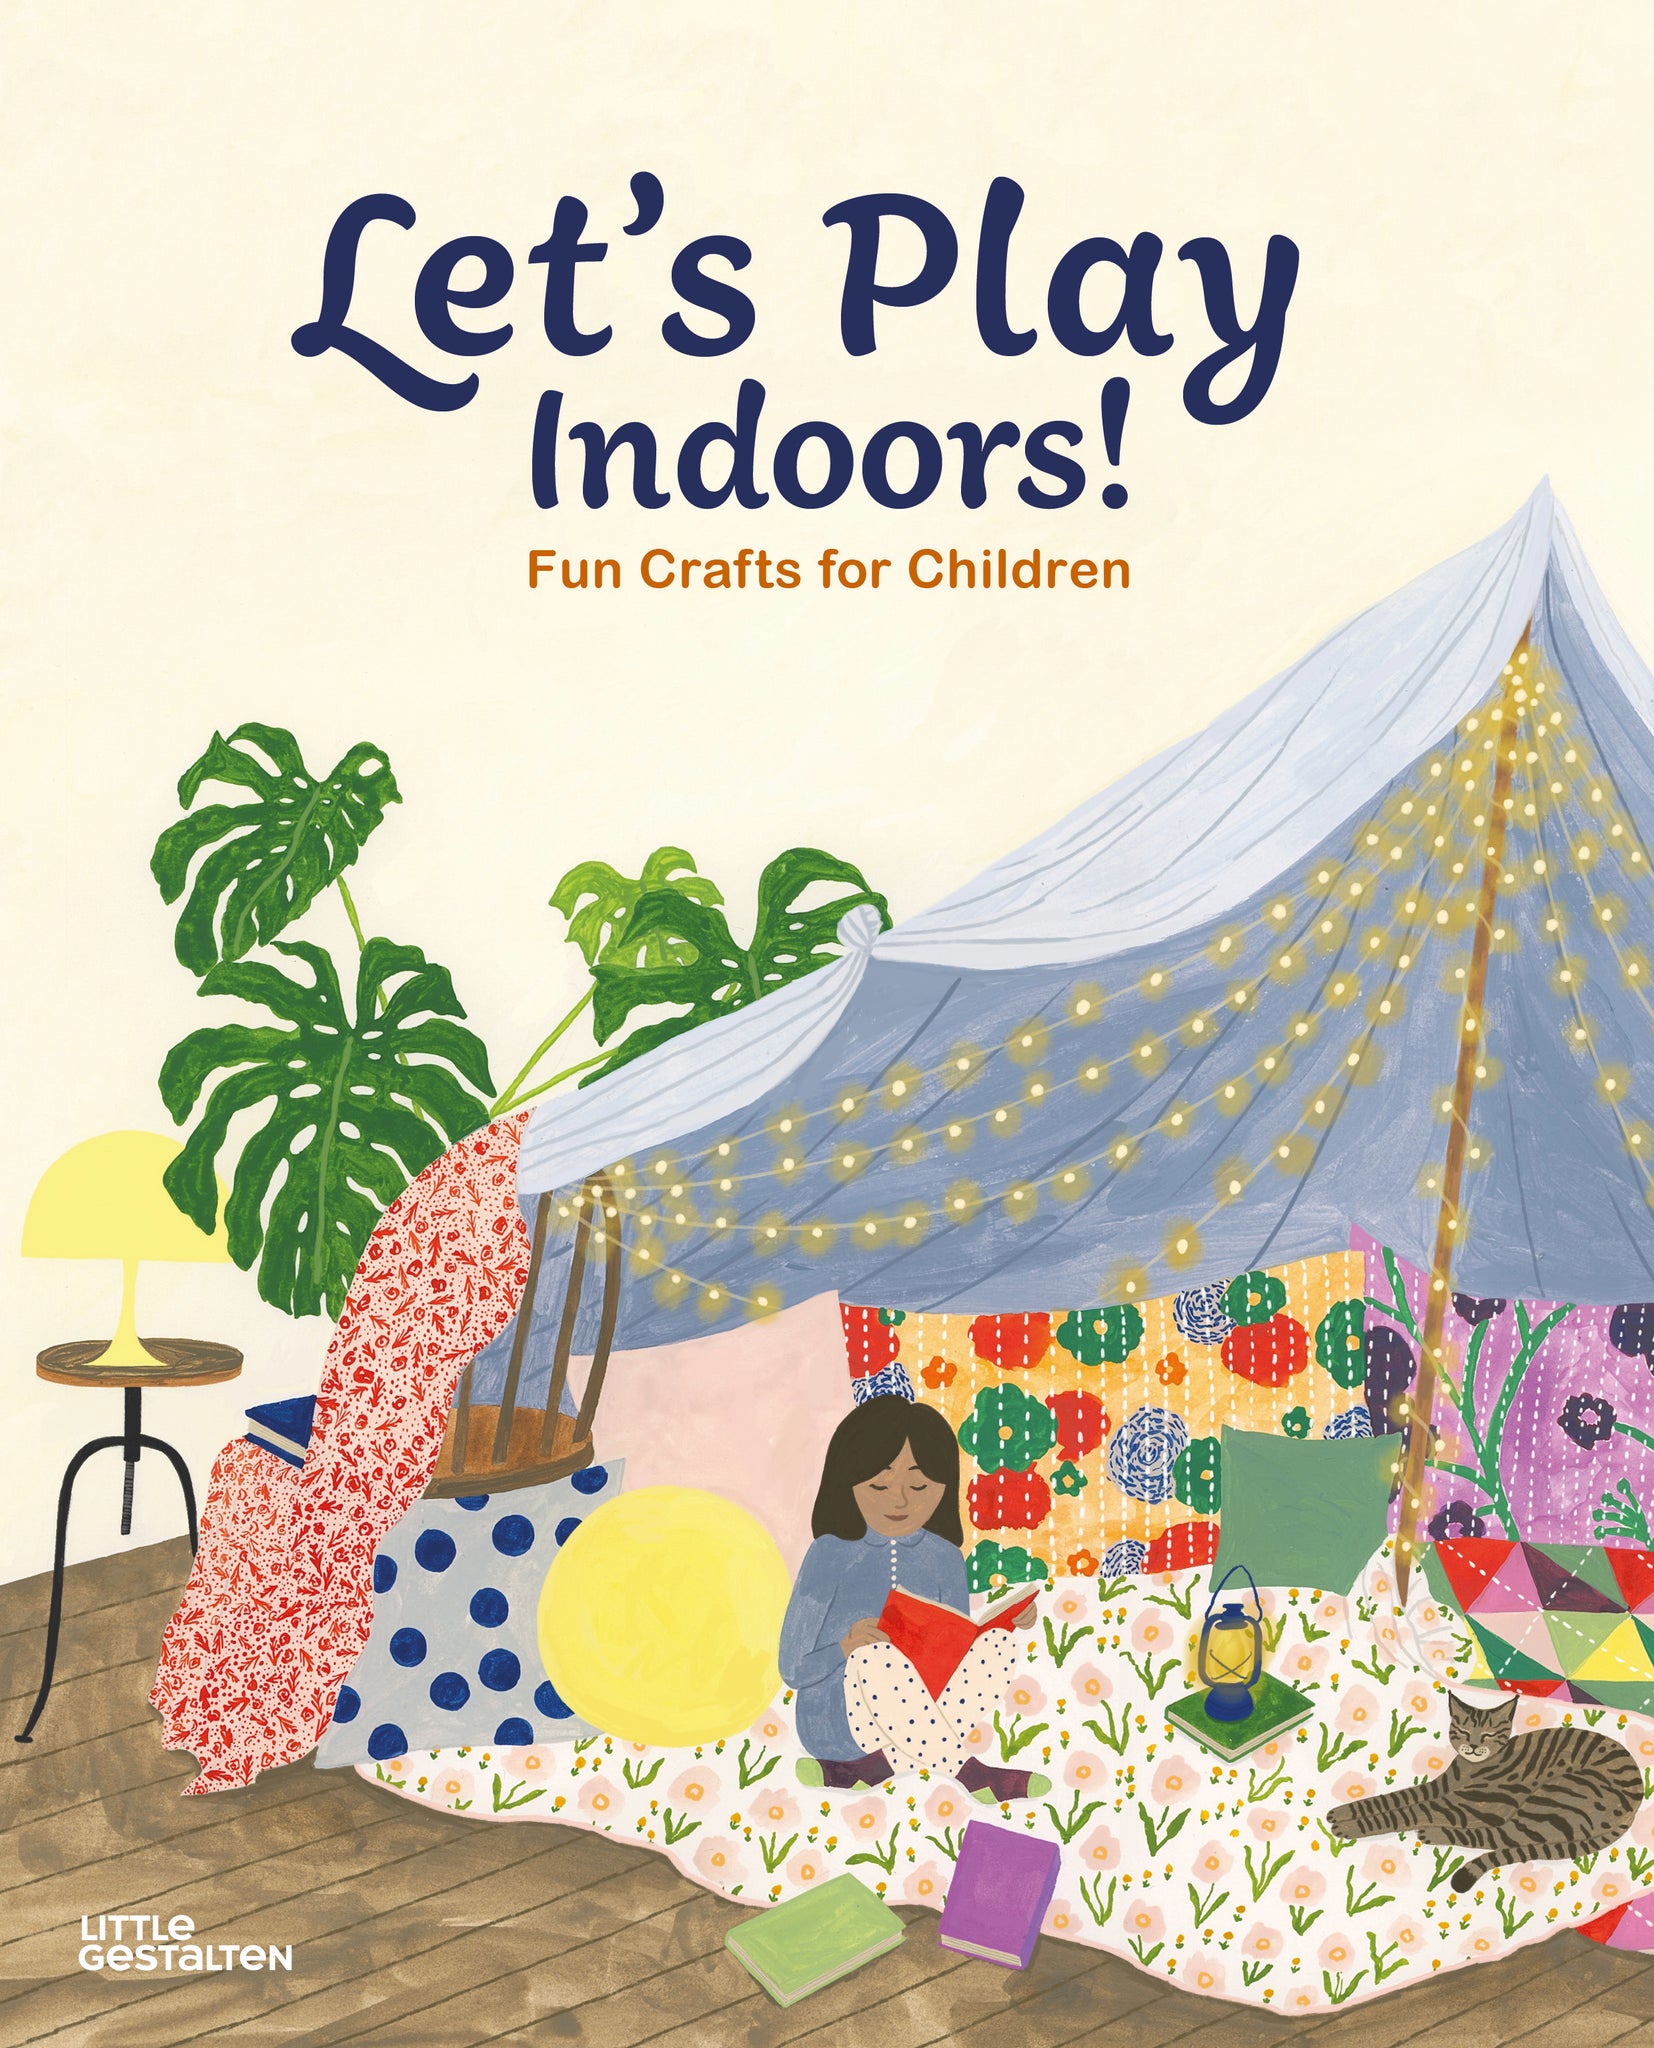 Let's Play Indoors! Fun Crafts for Children cover